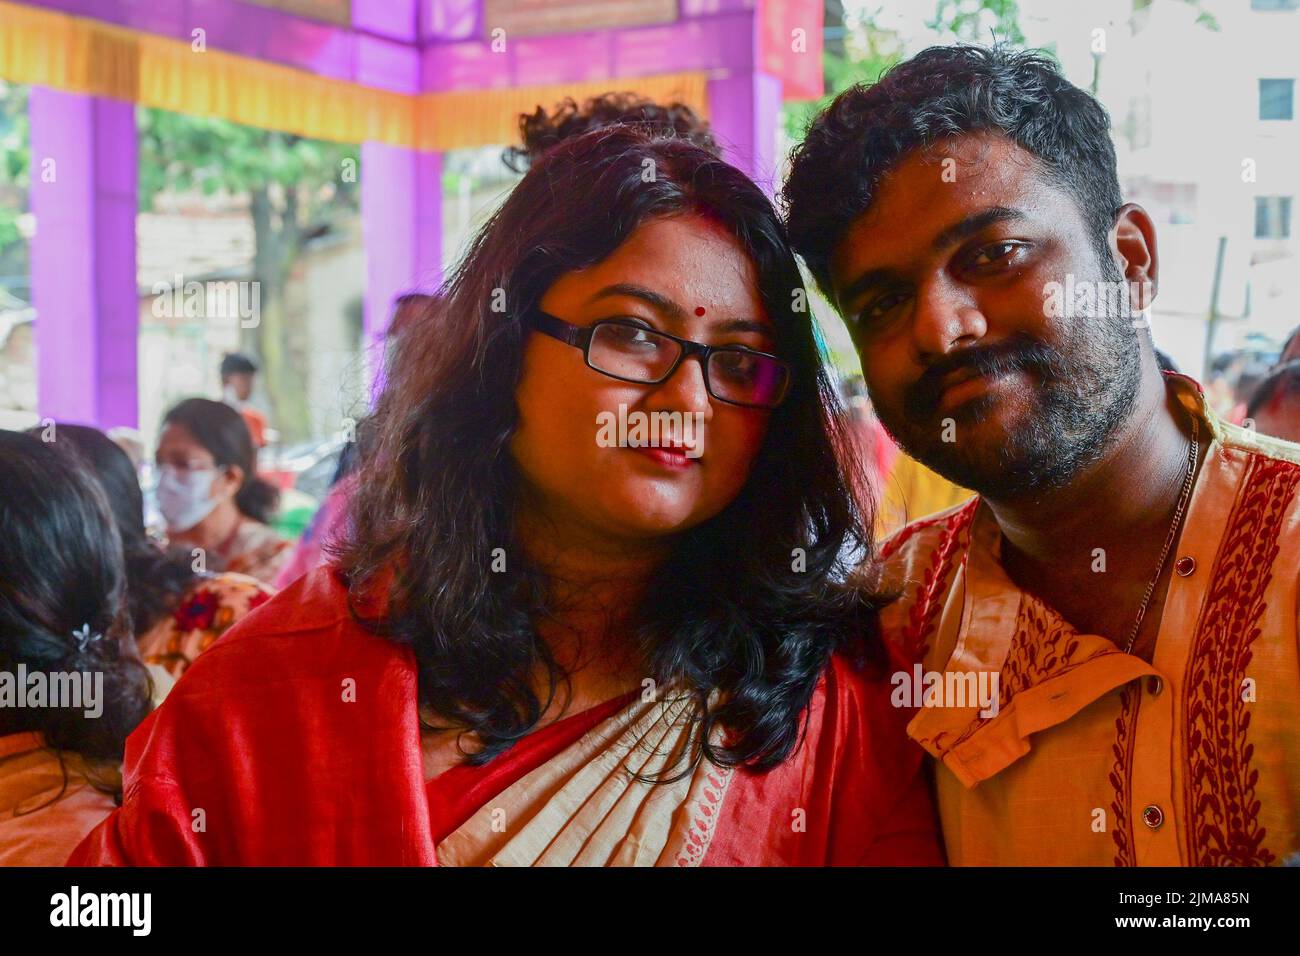 Howrah, West Bengal, India - 14th October 2021 : Newly married romantic couple posing for camera inside Durga Puja pandal. Durga Puja festival. Stock Photo